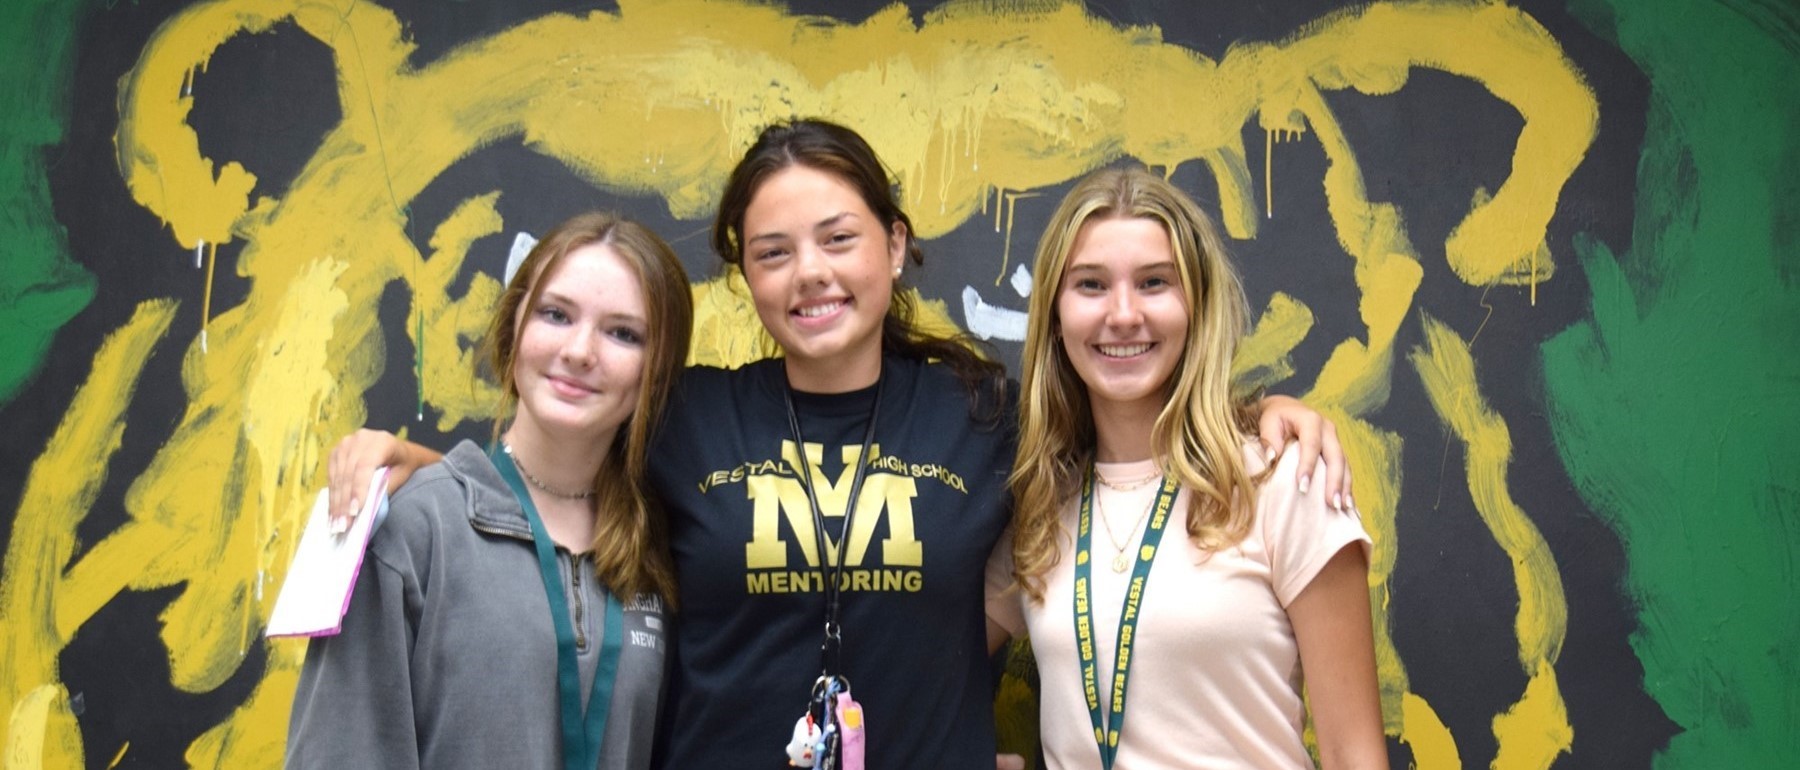 A Vestal High School student mentor poses with her two ninth-graders that she will be mentoring throughout the 2022-23 school year.